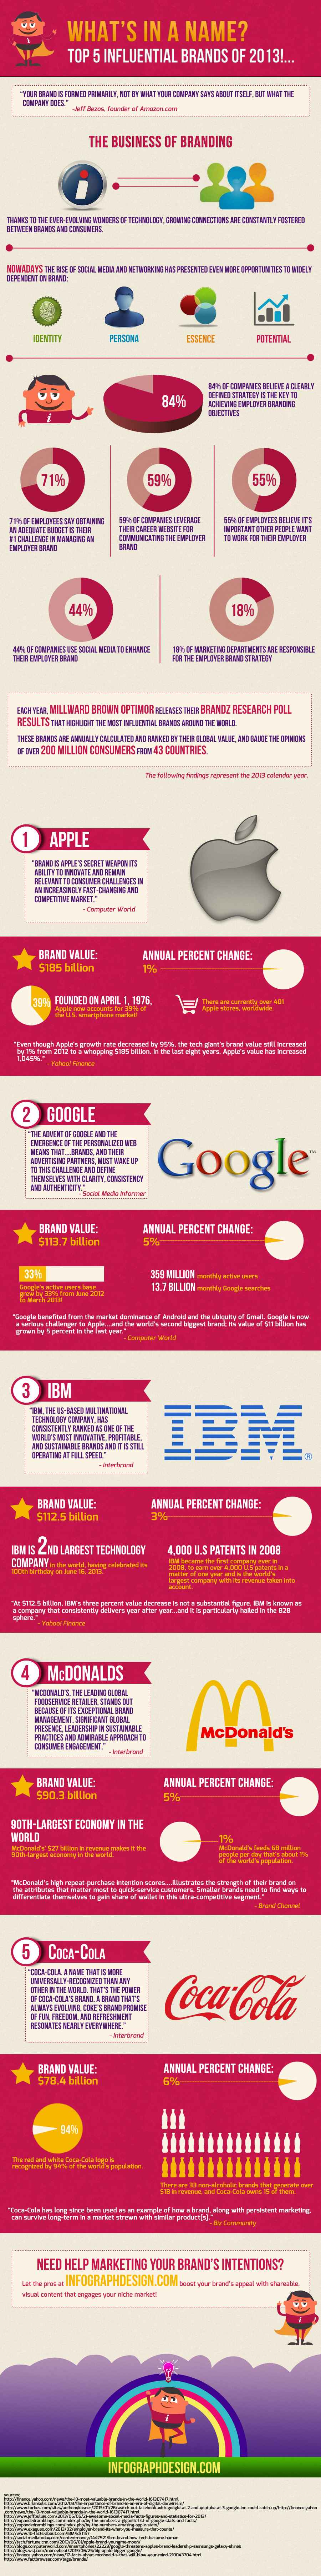 What’s In a Name? Top 5 Influential Brands of 2013